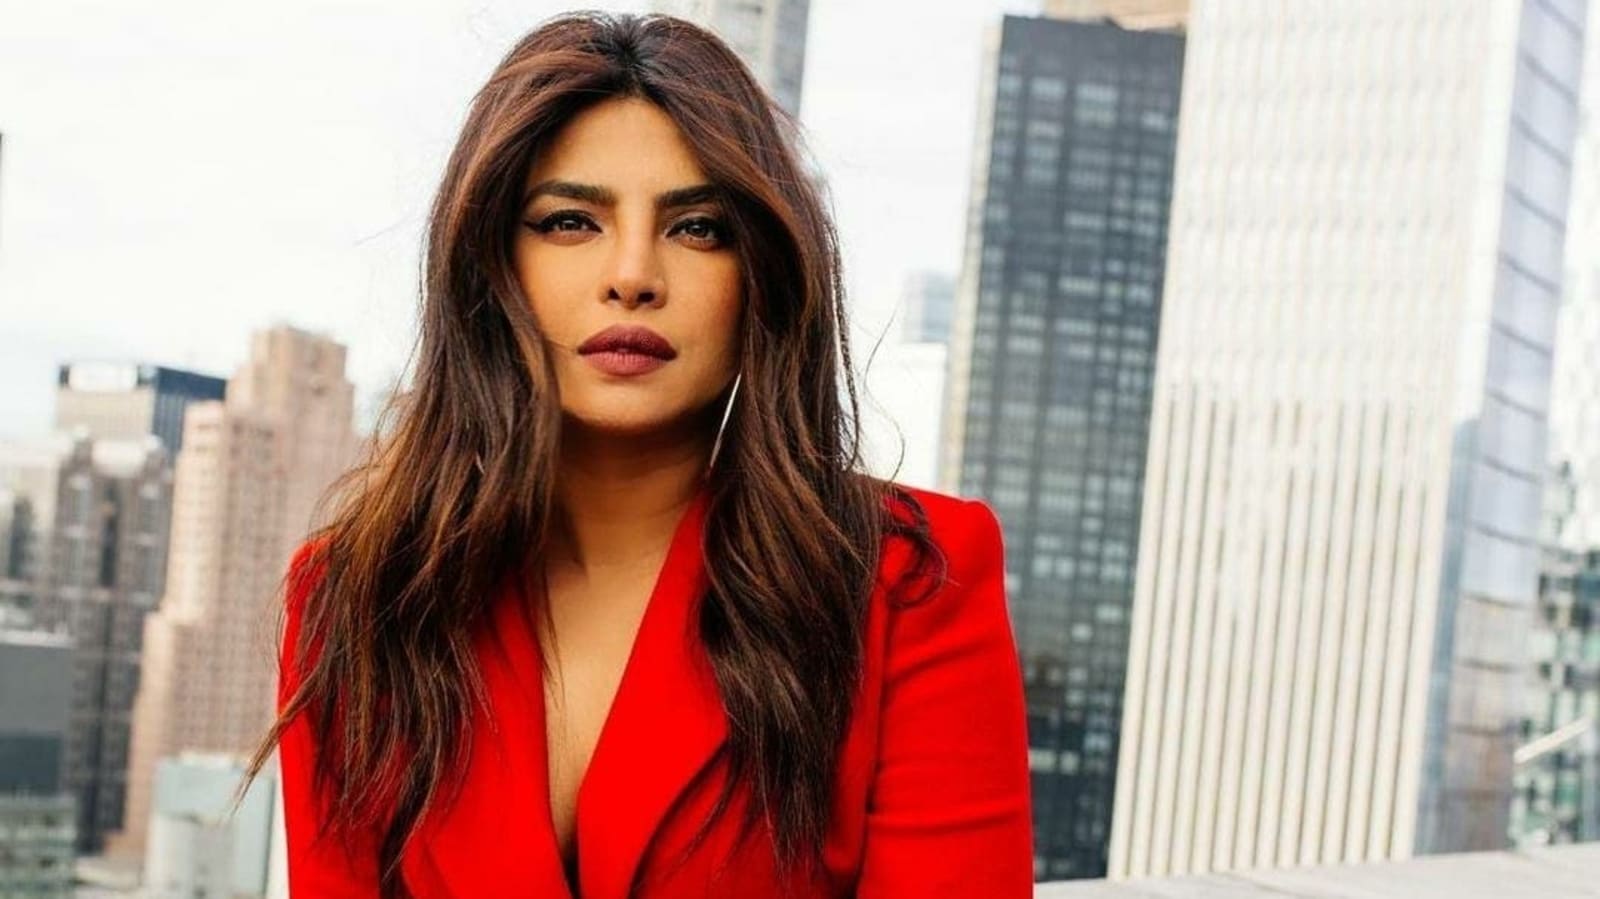 Priyanka Chopra Appears on First Magazine Cover After Baby’s Birth, Says She ‘Wants to Prioritize What’s Important’ |  Bollywood